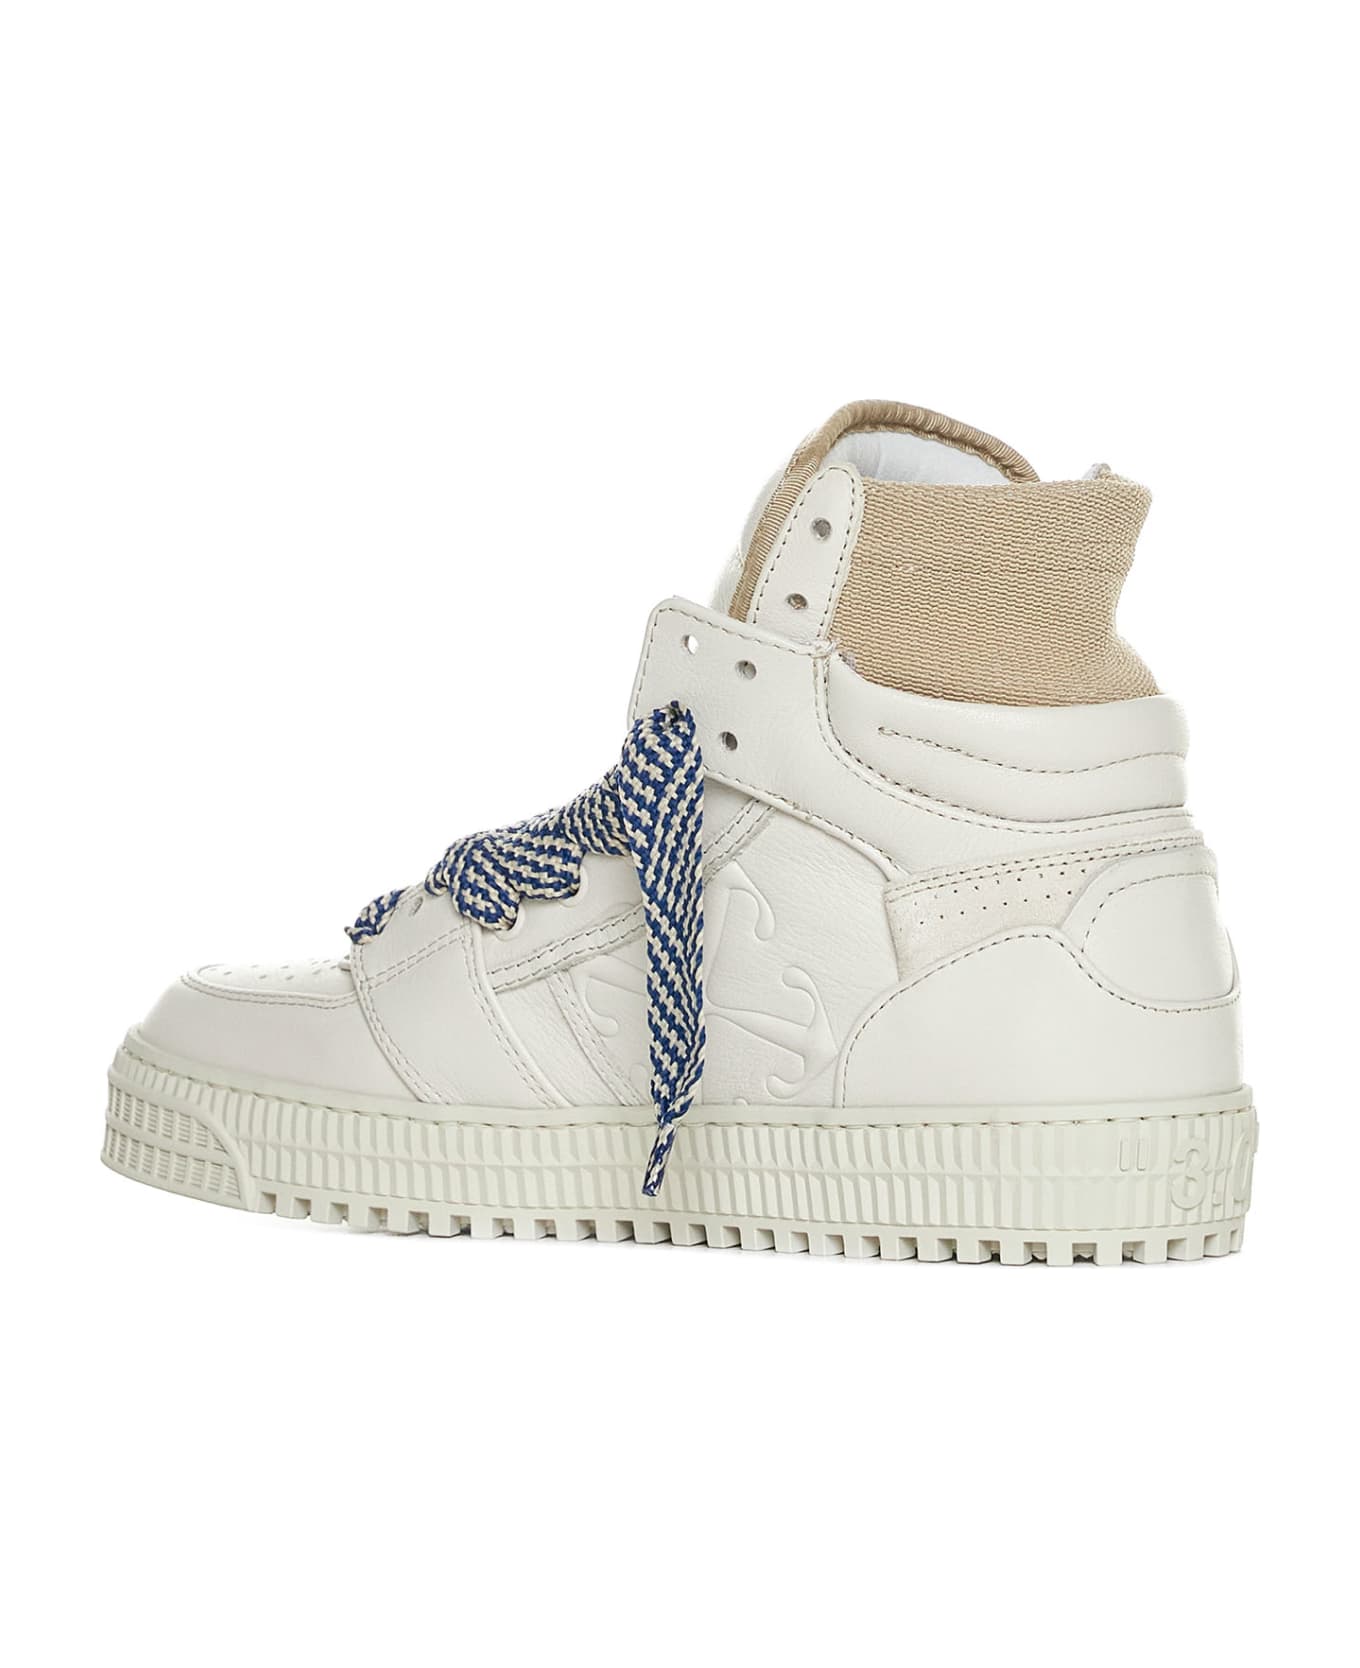 Off-White Sneakers - Cream navy bl